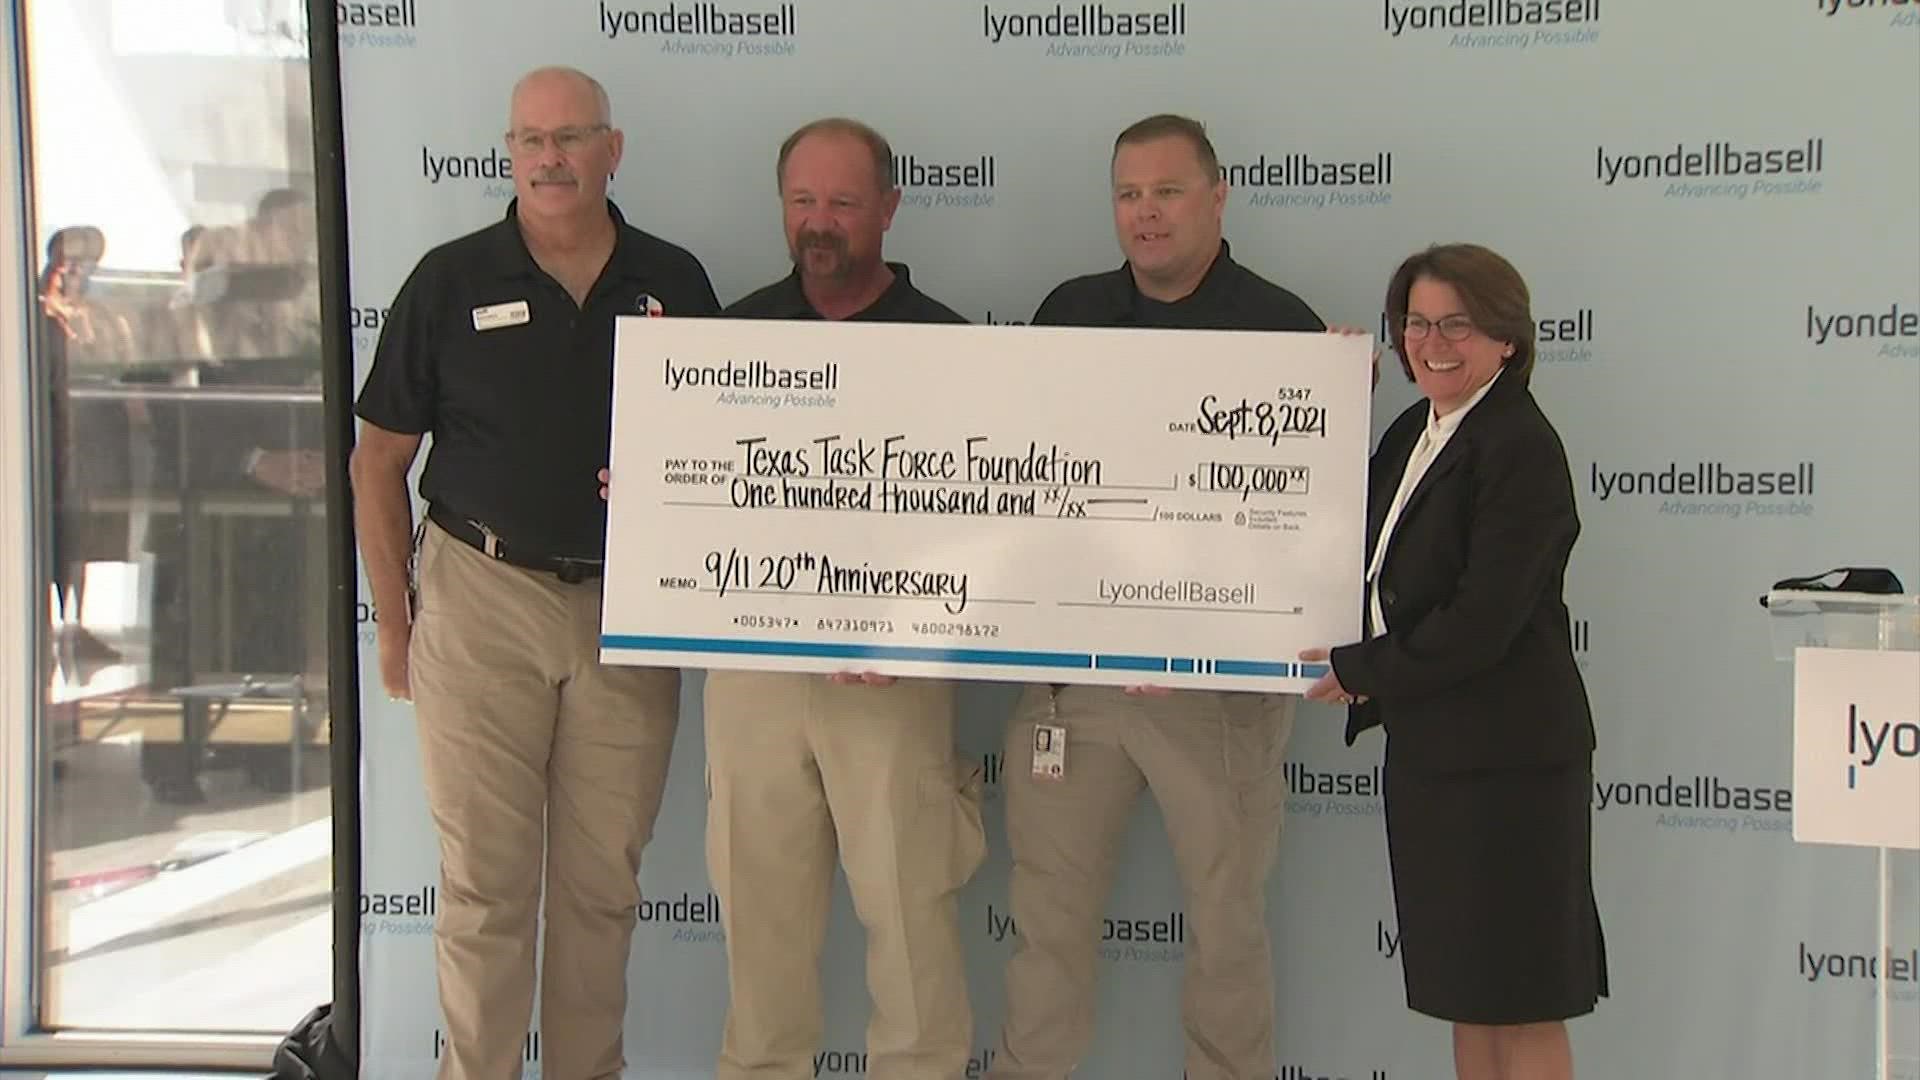 LyondellBassell donates $200,000 toward first responder training and a mural in honor of 9/11 heroes.